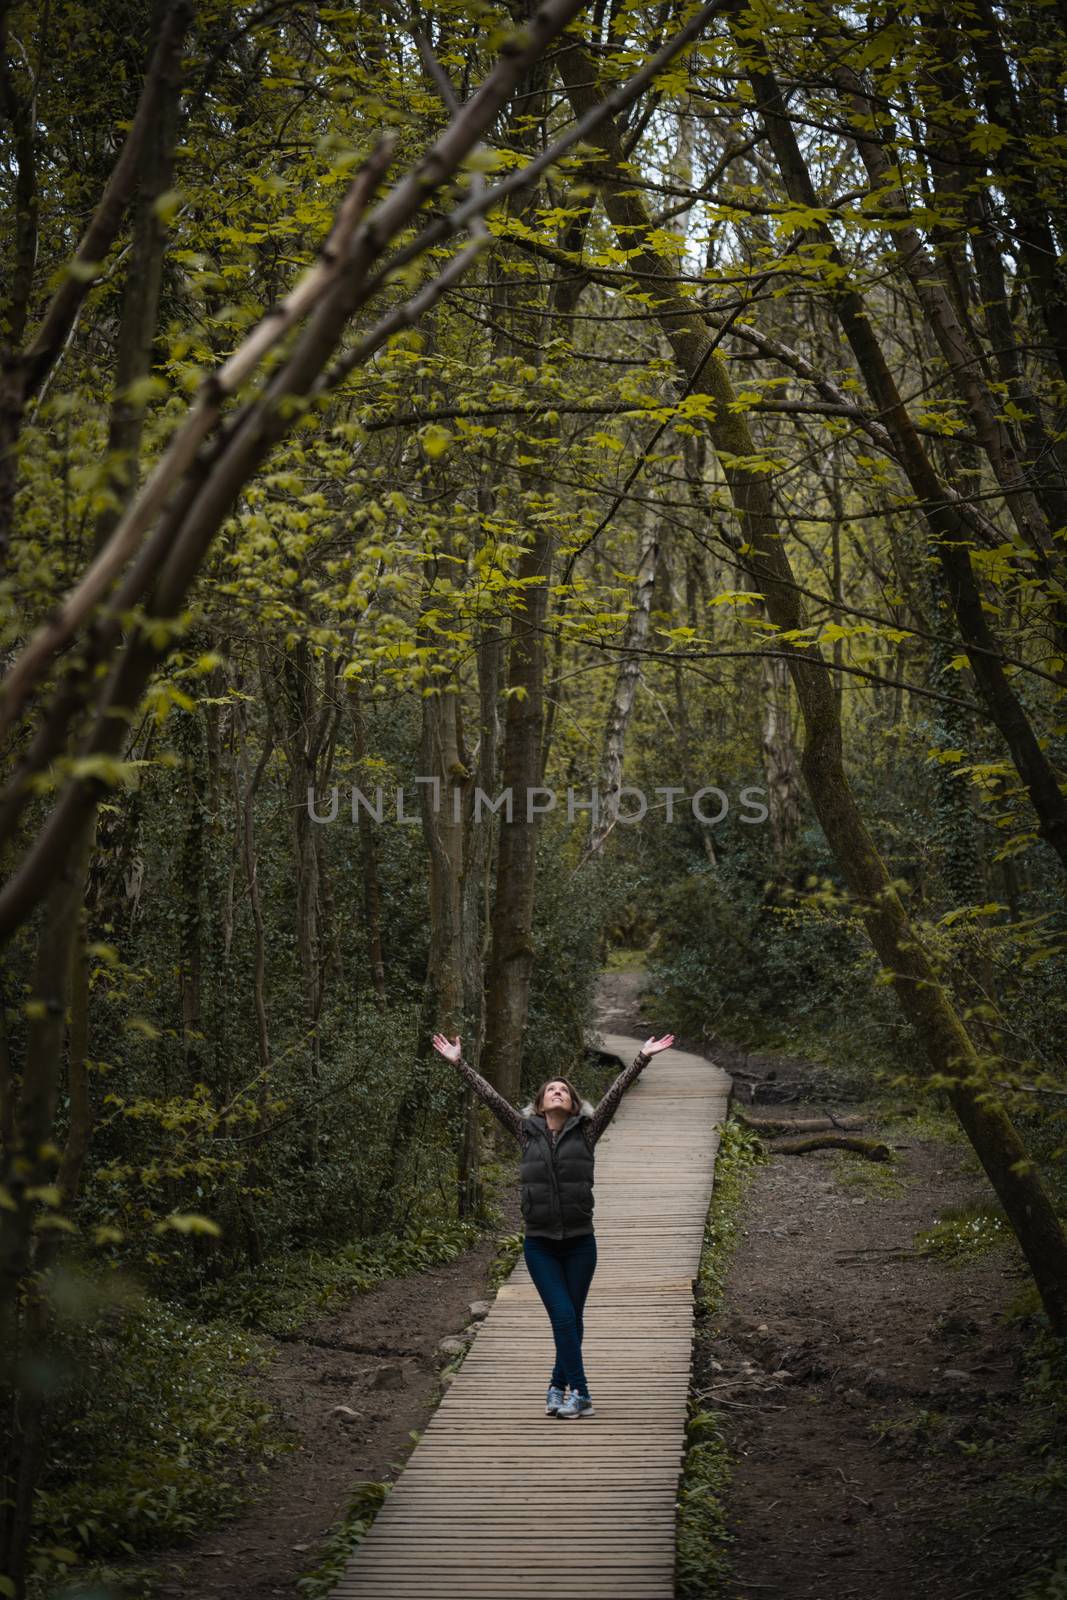 Attractive Woman In Forest by samULvisuals